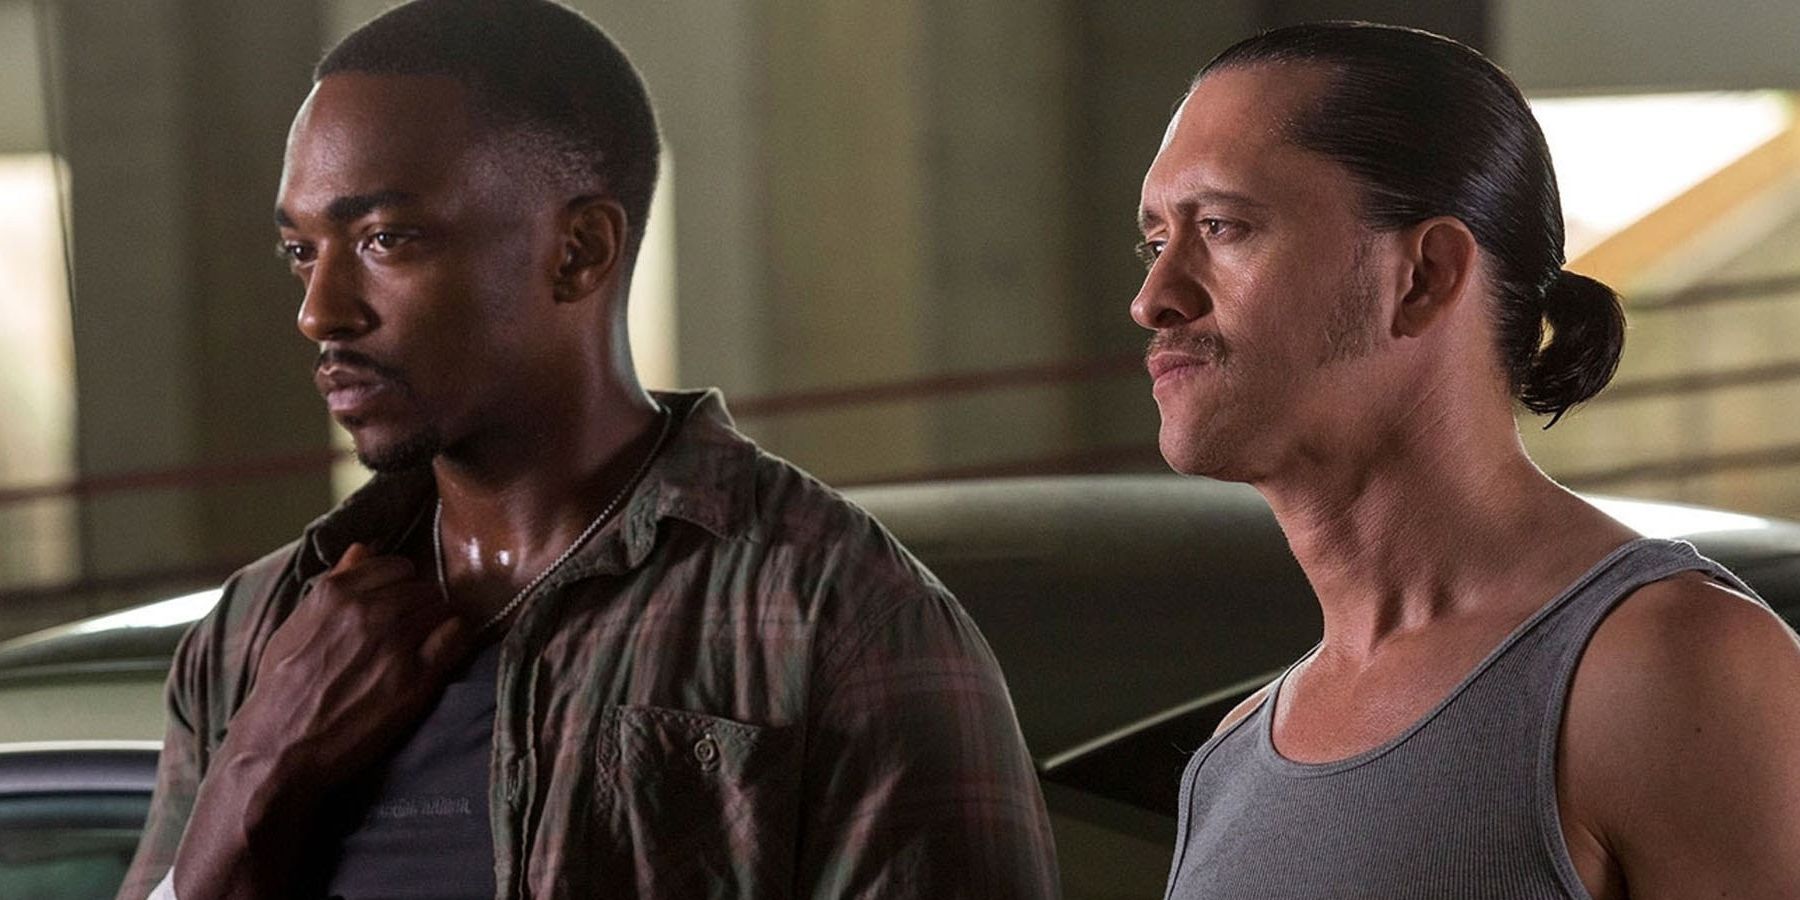 Anthony Mackie and Clifton Collins Jr. as Marcus Belmont and Franco Rodriguez looking intently in the same direction in Triple 9